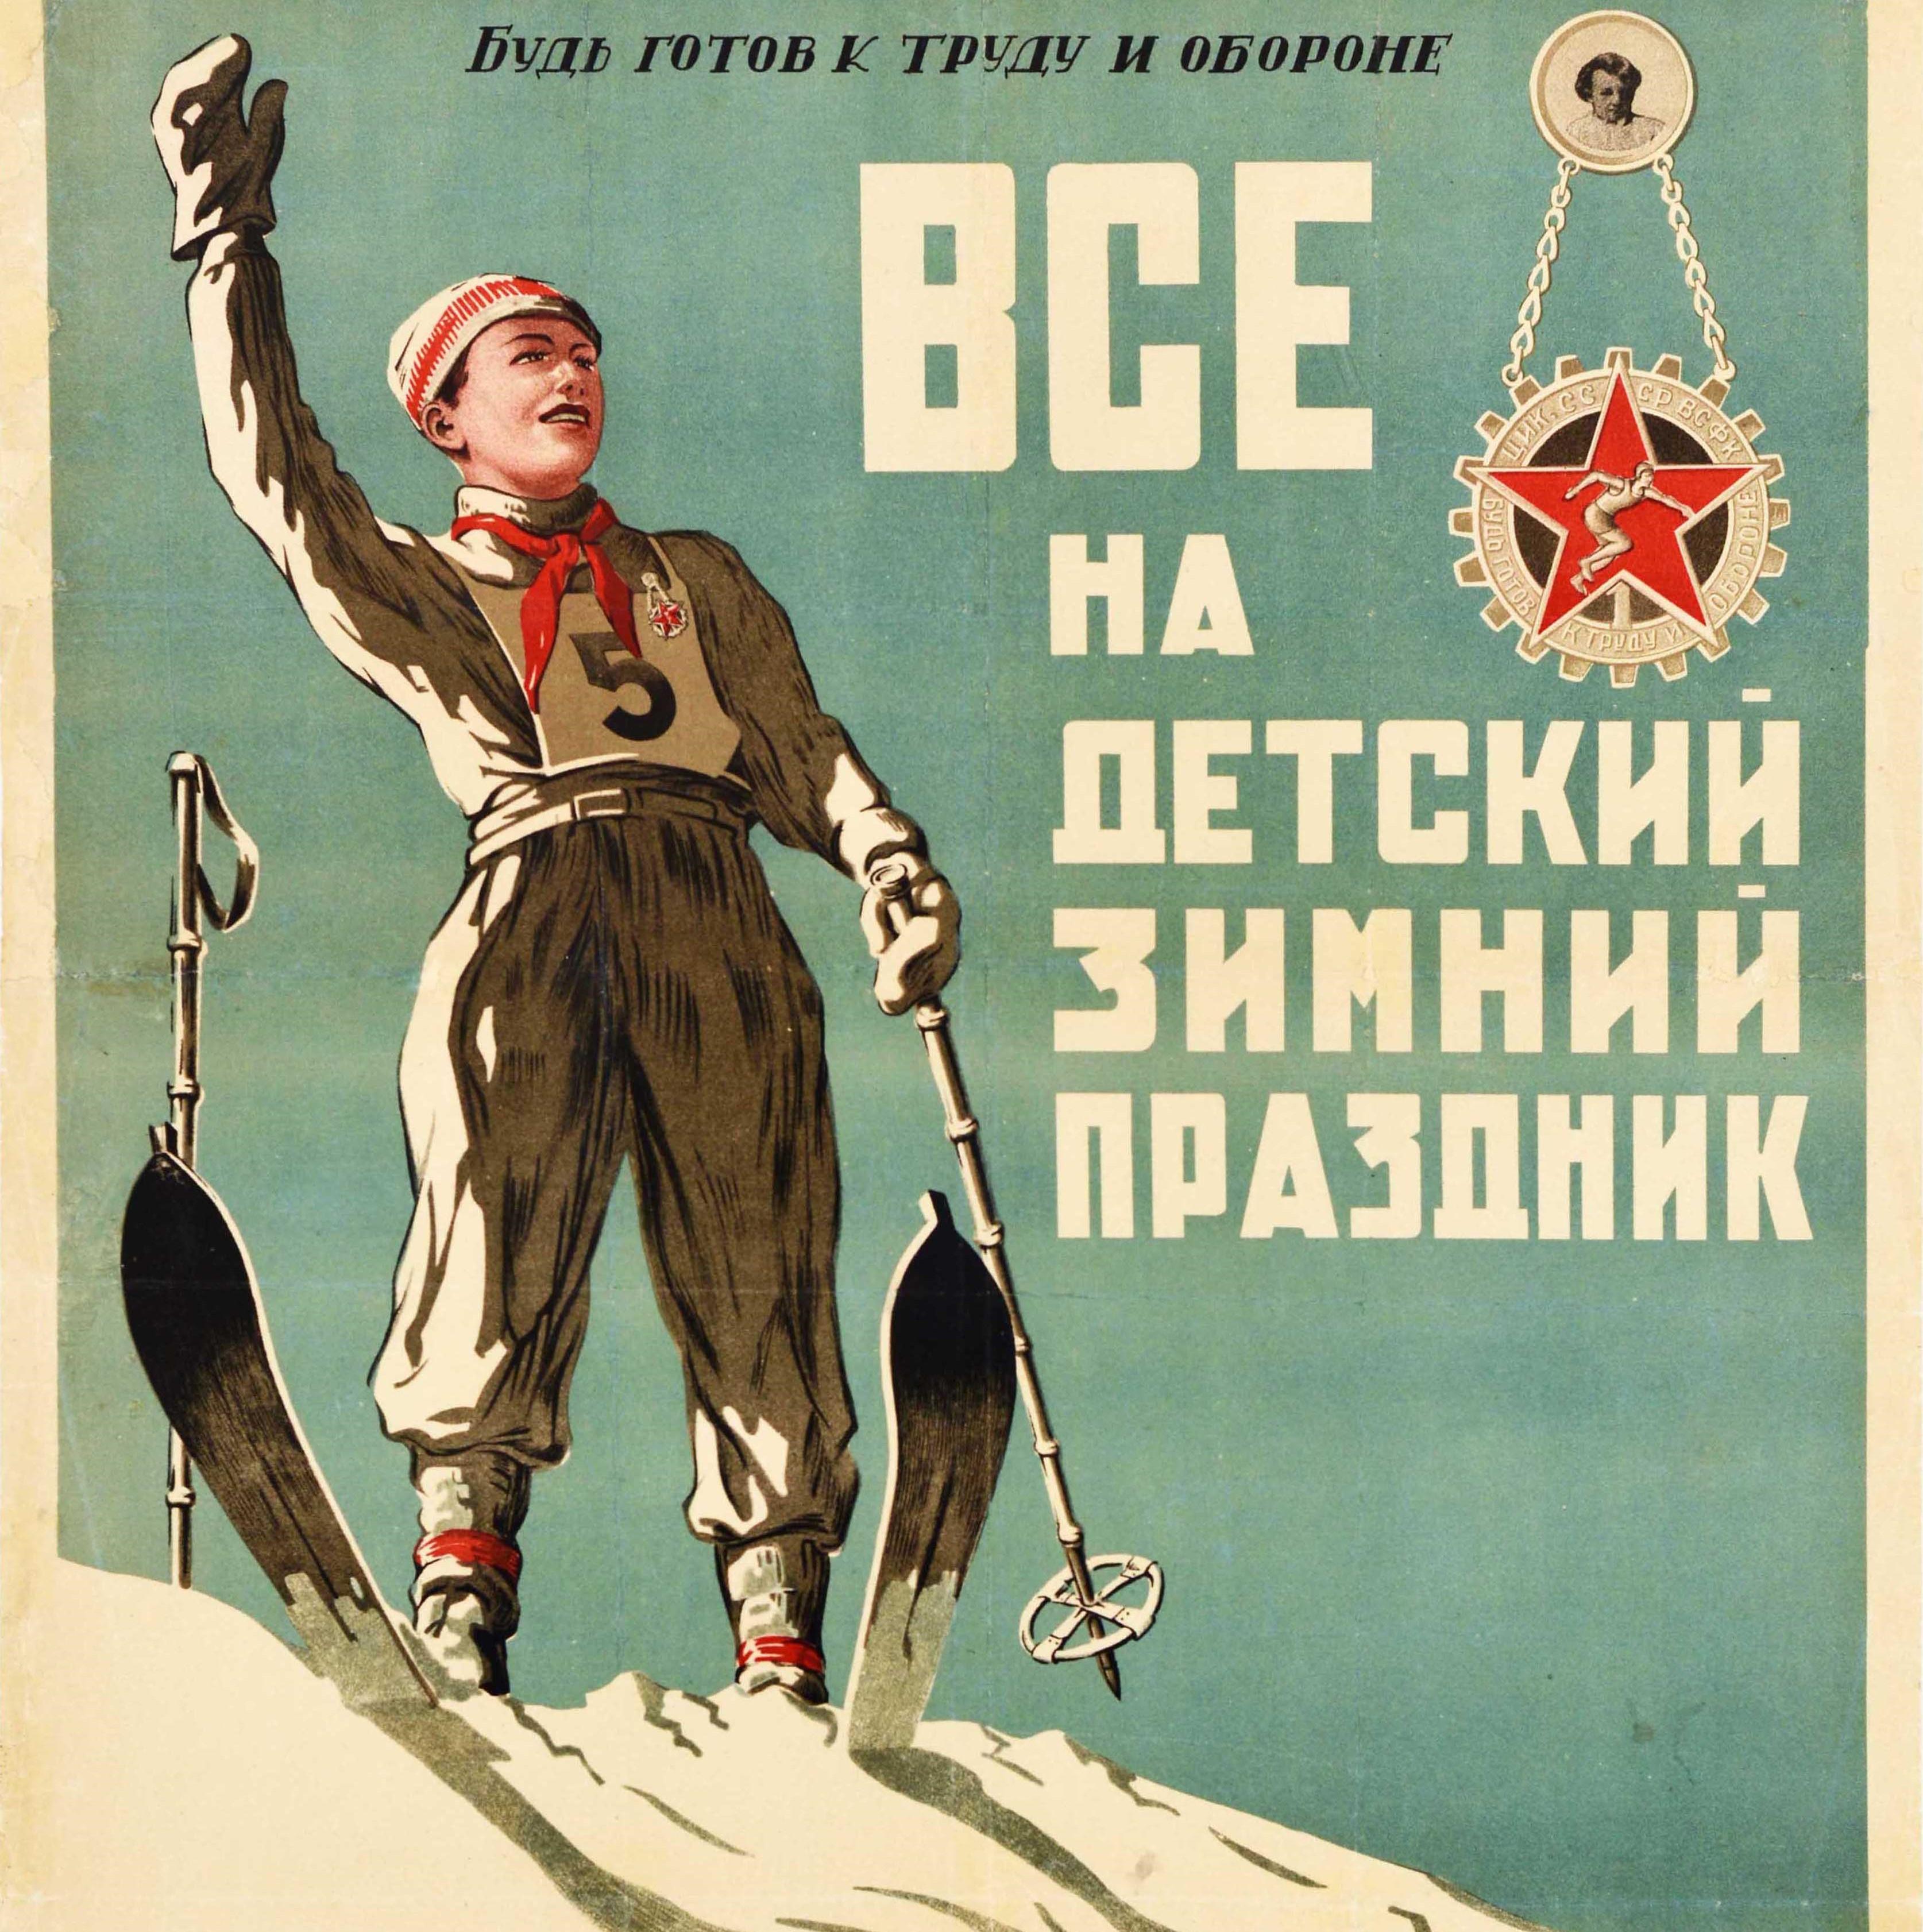 Original vintage Soviet sports propaganda poster - All to the Children's Winter Festival - featuring an image of a young boy wearing a red Pioneers scarf and bib number 5 on skis at the top of a white snowy slope with a medal and the bold title text